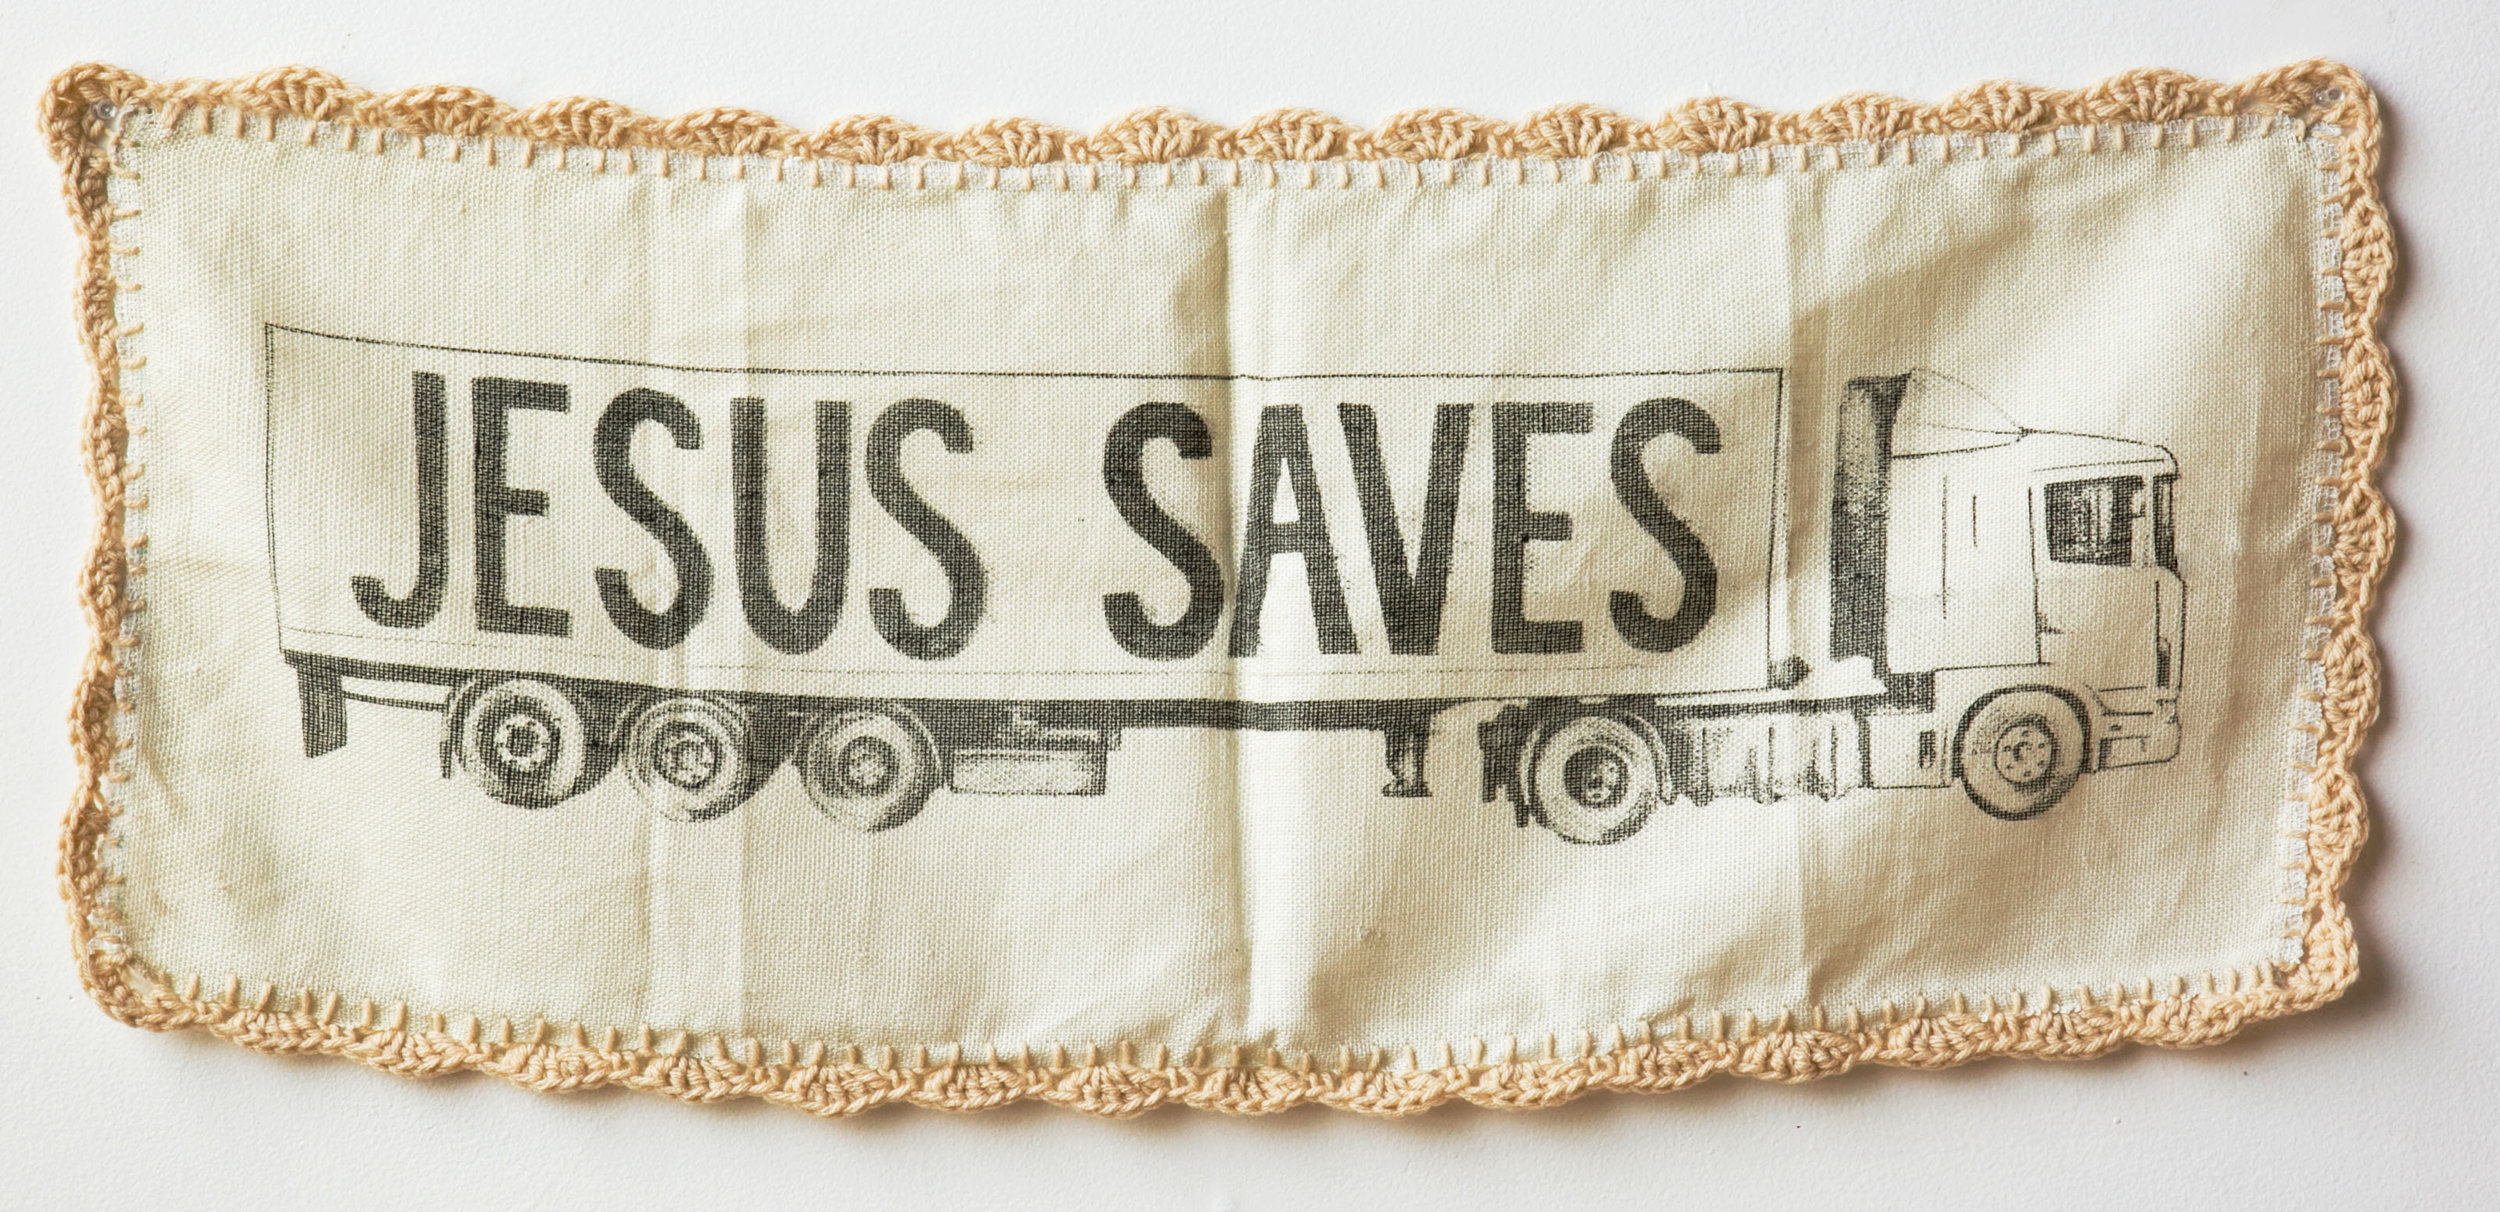   jesus saves   lithograph on handwoven linen, 2018  26 x 10 in. 